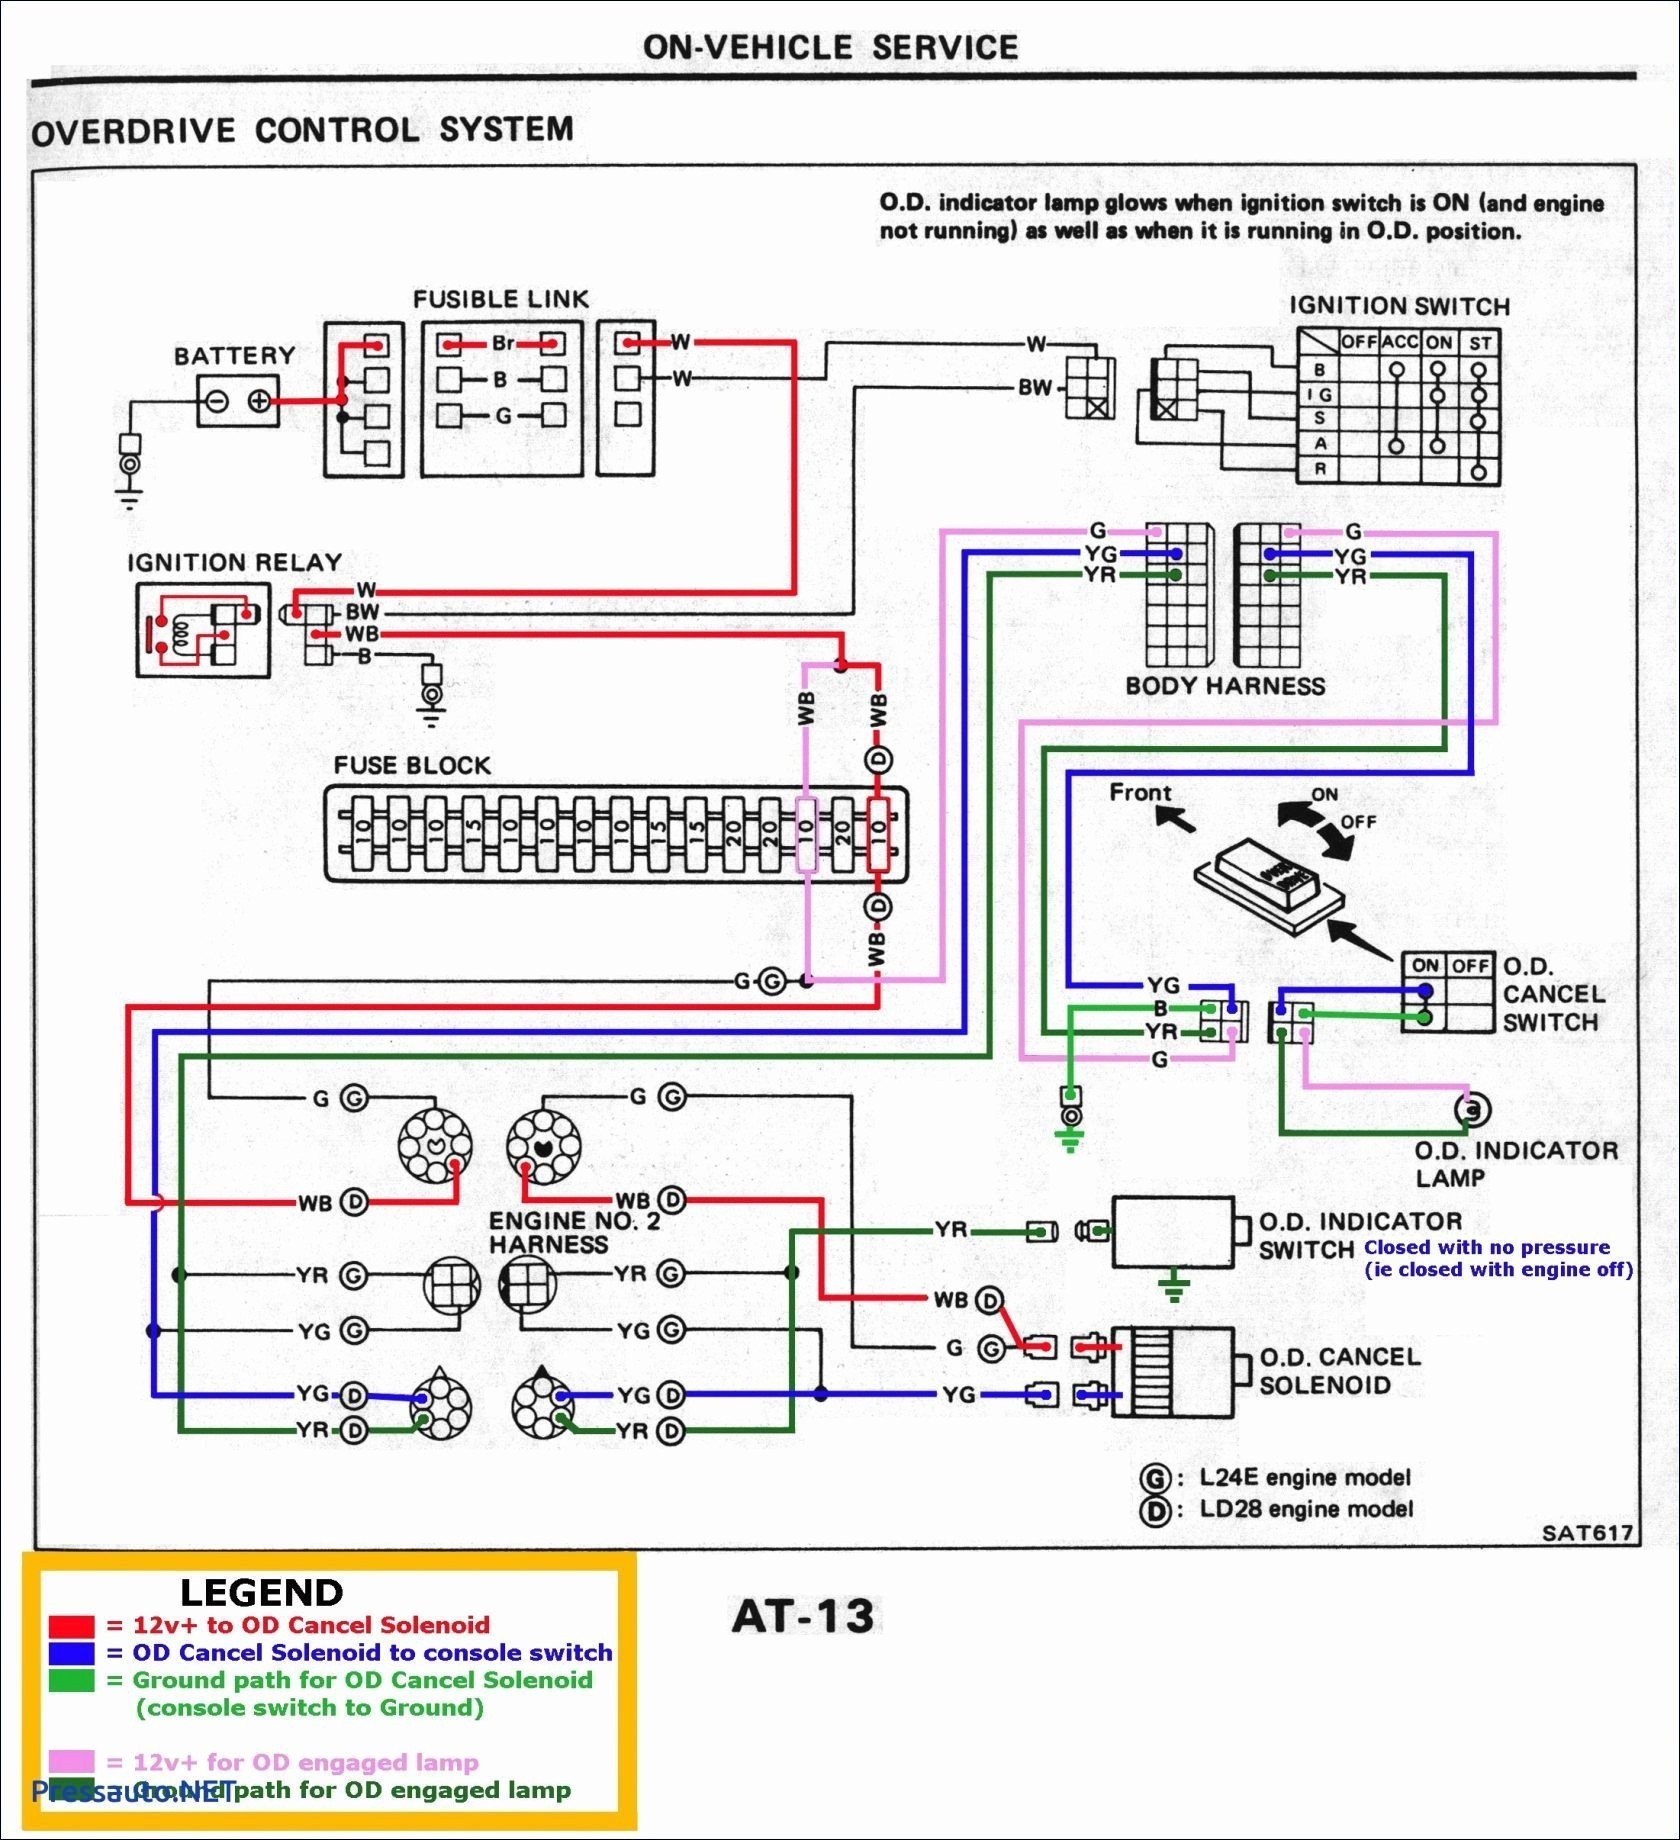 Leviton Voice Grade Jack Wiring Diagram Inspirational Wiring Diagram For Distribution Board & Layout Diagram House